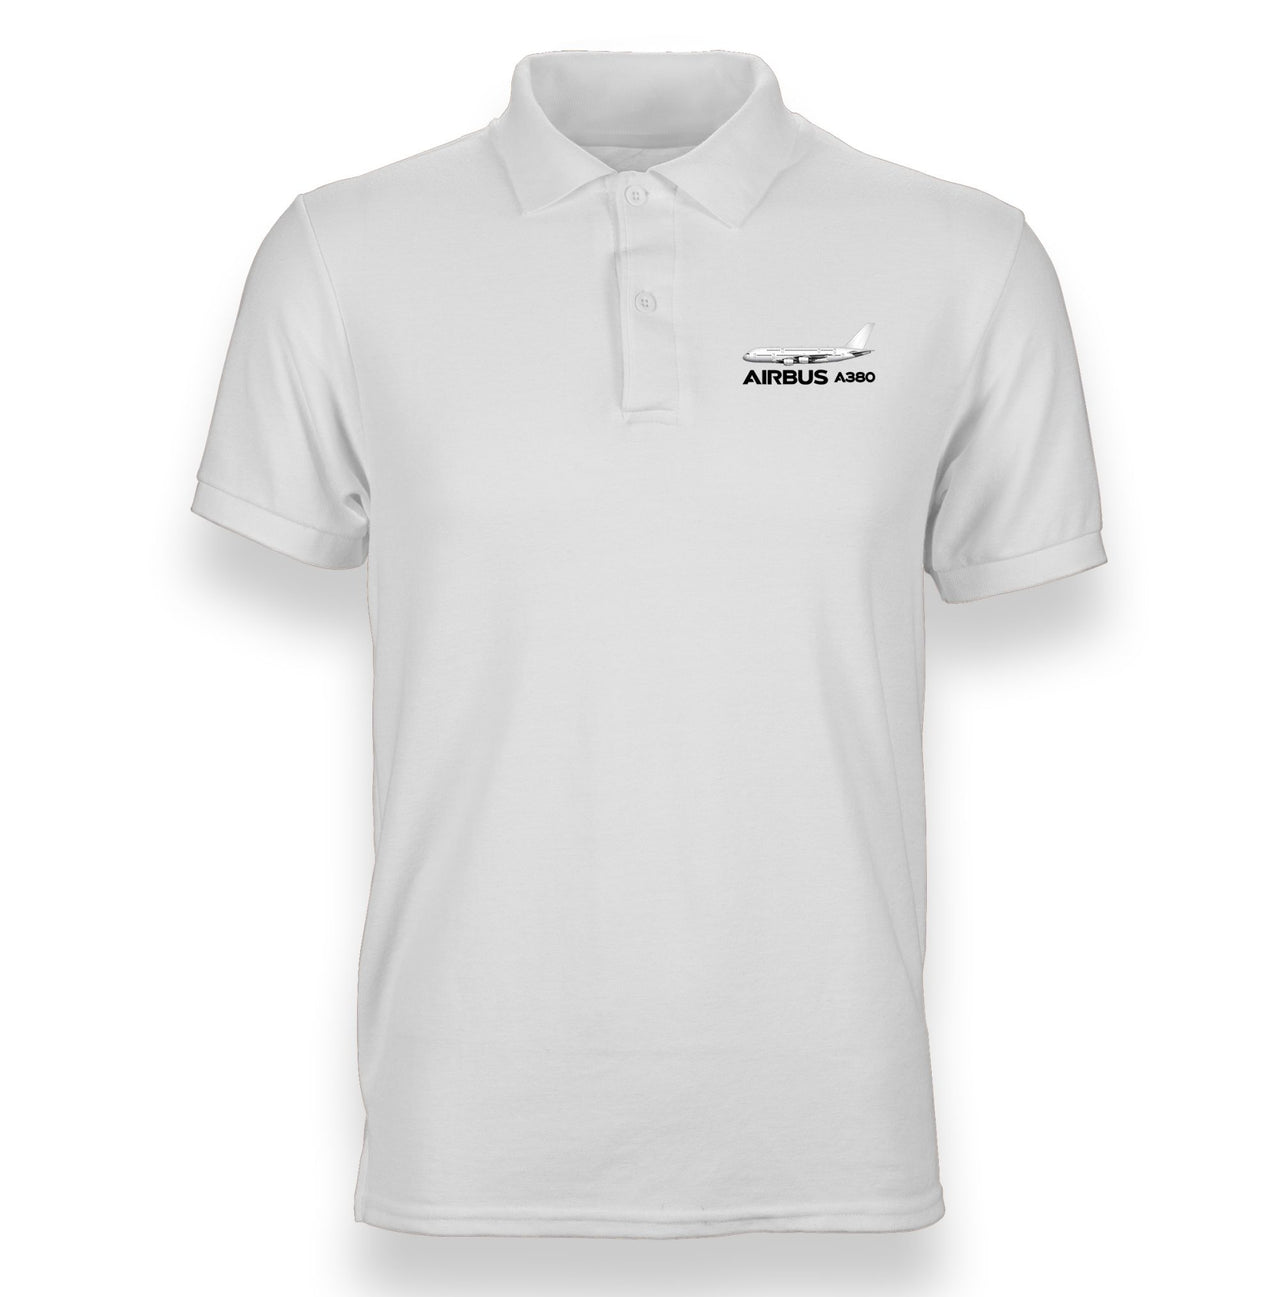 The Airbus A380 Designed "WOMEN" Polo T-Shirts